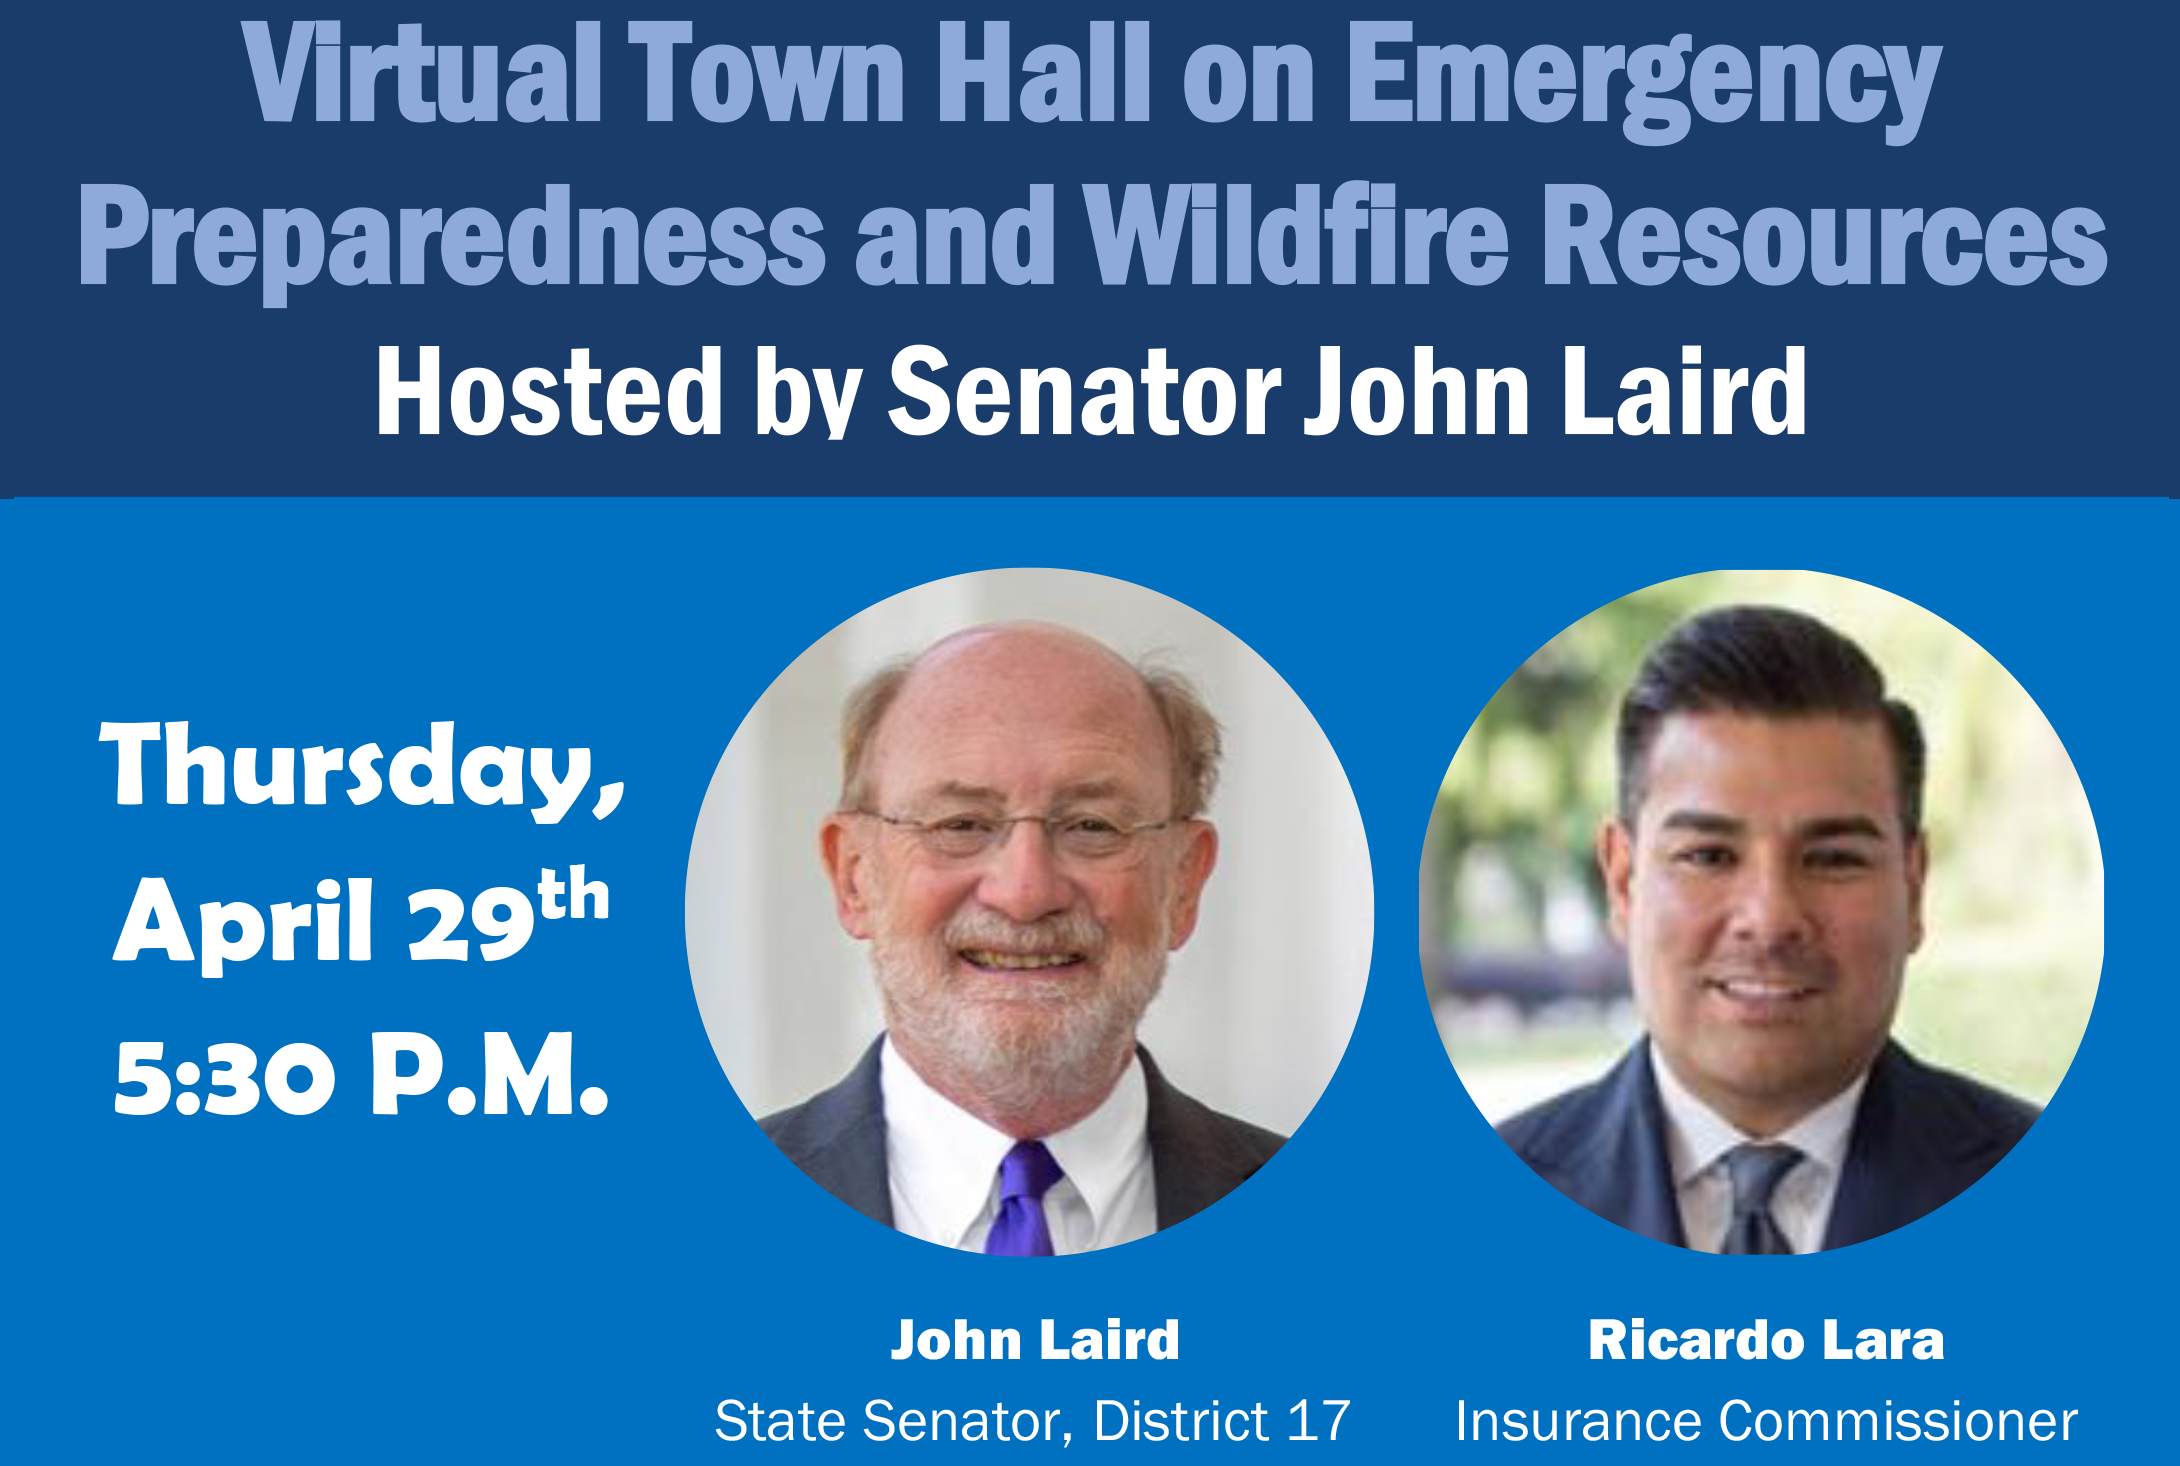 Virtual Town Hall on Emergency, Preparedness and Wildfire Resources, Hosted by Senator John Laird, Thursday, April 29th,5:30 P.M., John Laird, State Senator, District 17